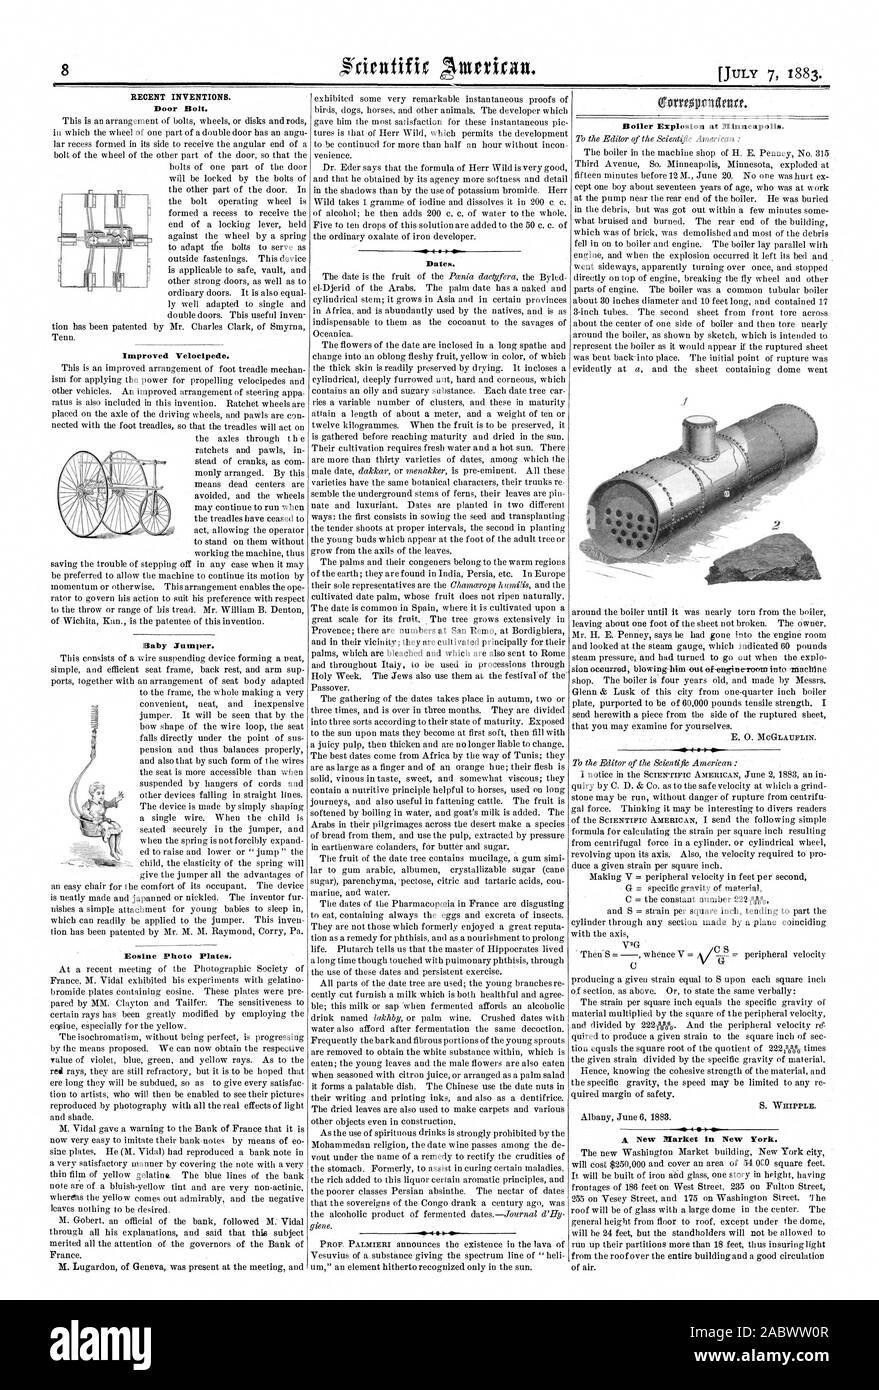 Eosine Photo Plates. Baby Jumper. Improved Velocipede. RECENT INVENTIONS. Door Bolt. Dates. Boiler Explosion at Minneapolis. S. WHIPPLE. A New Market in New York., scientific american, 1883-07-07 Stock Photo